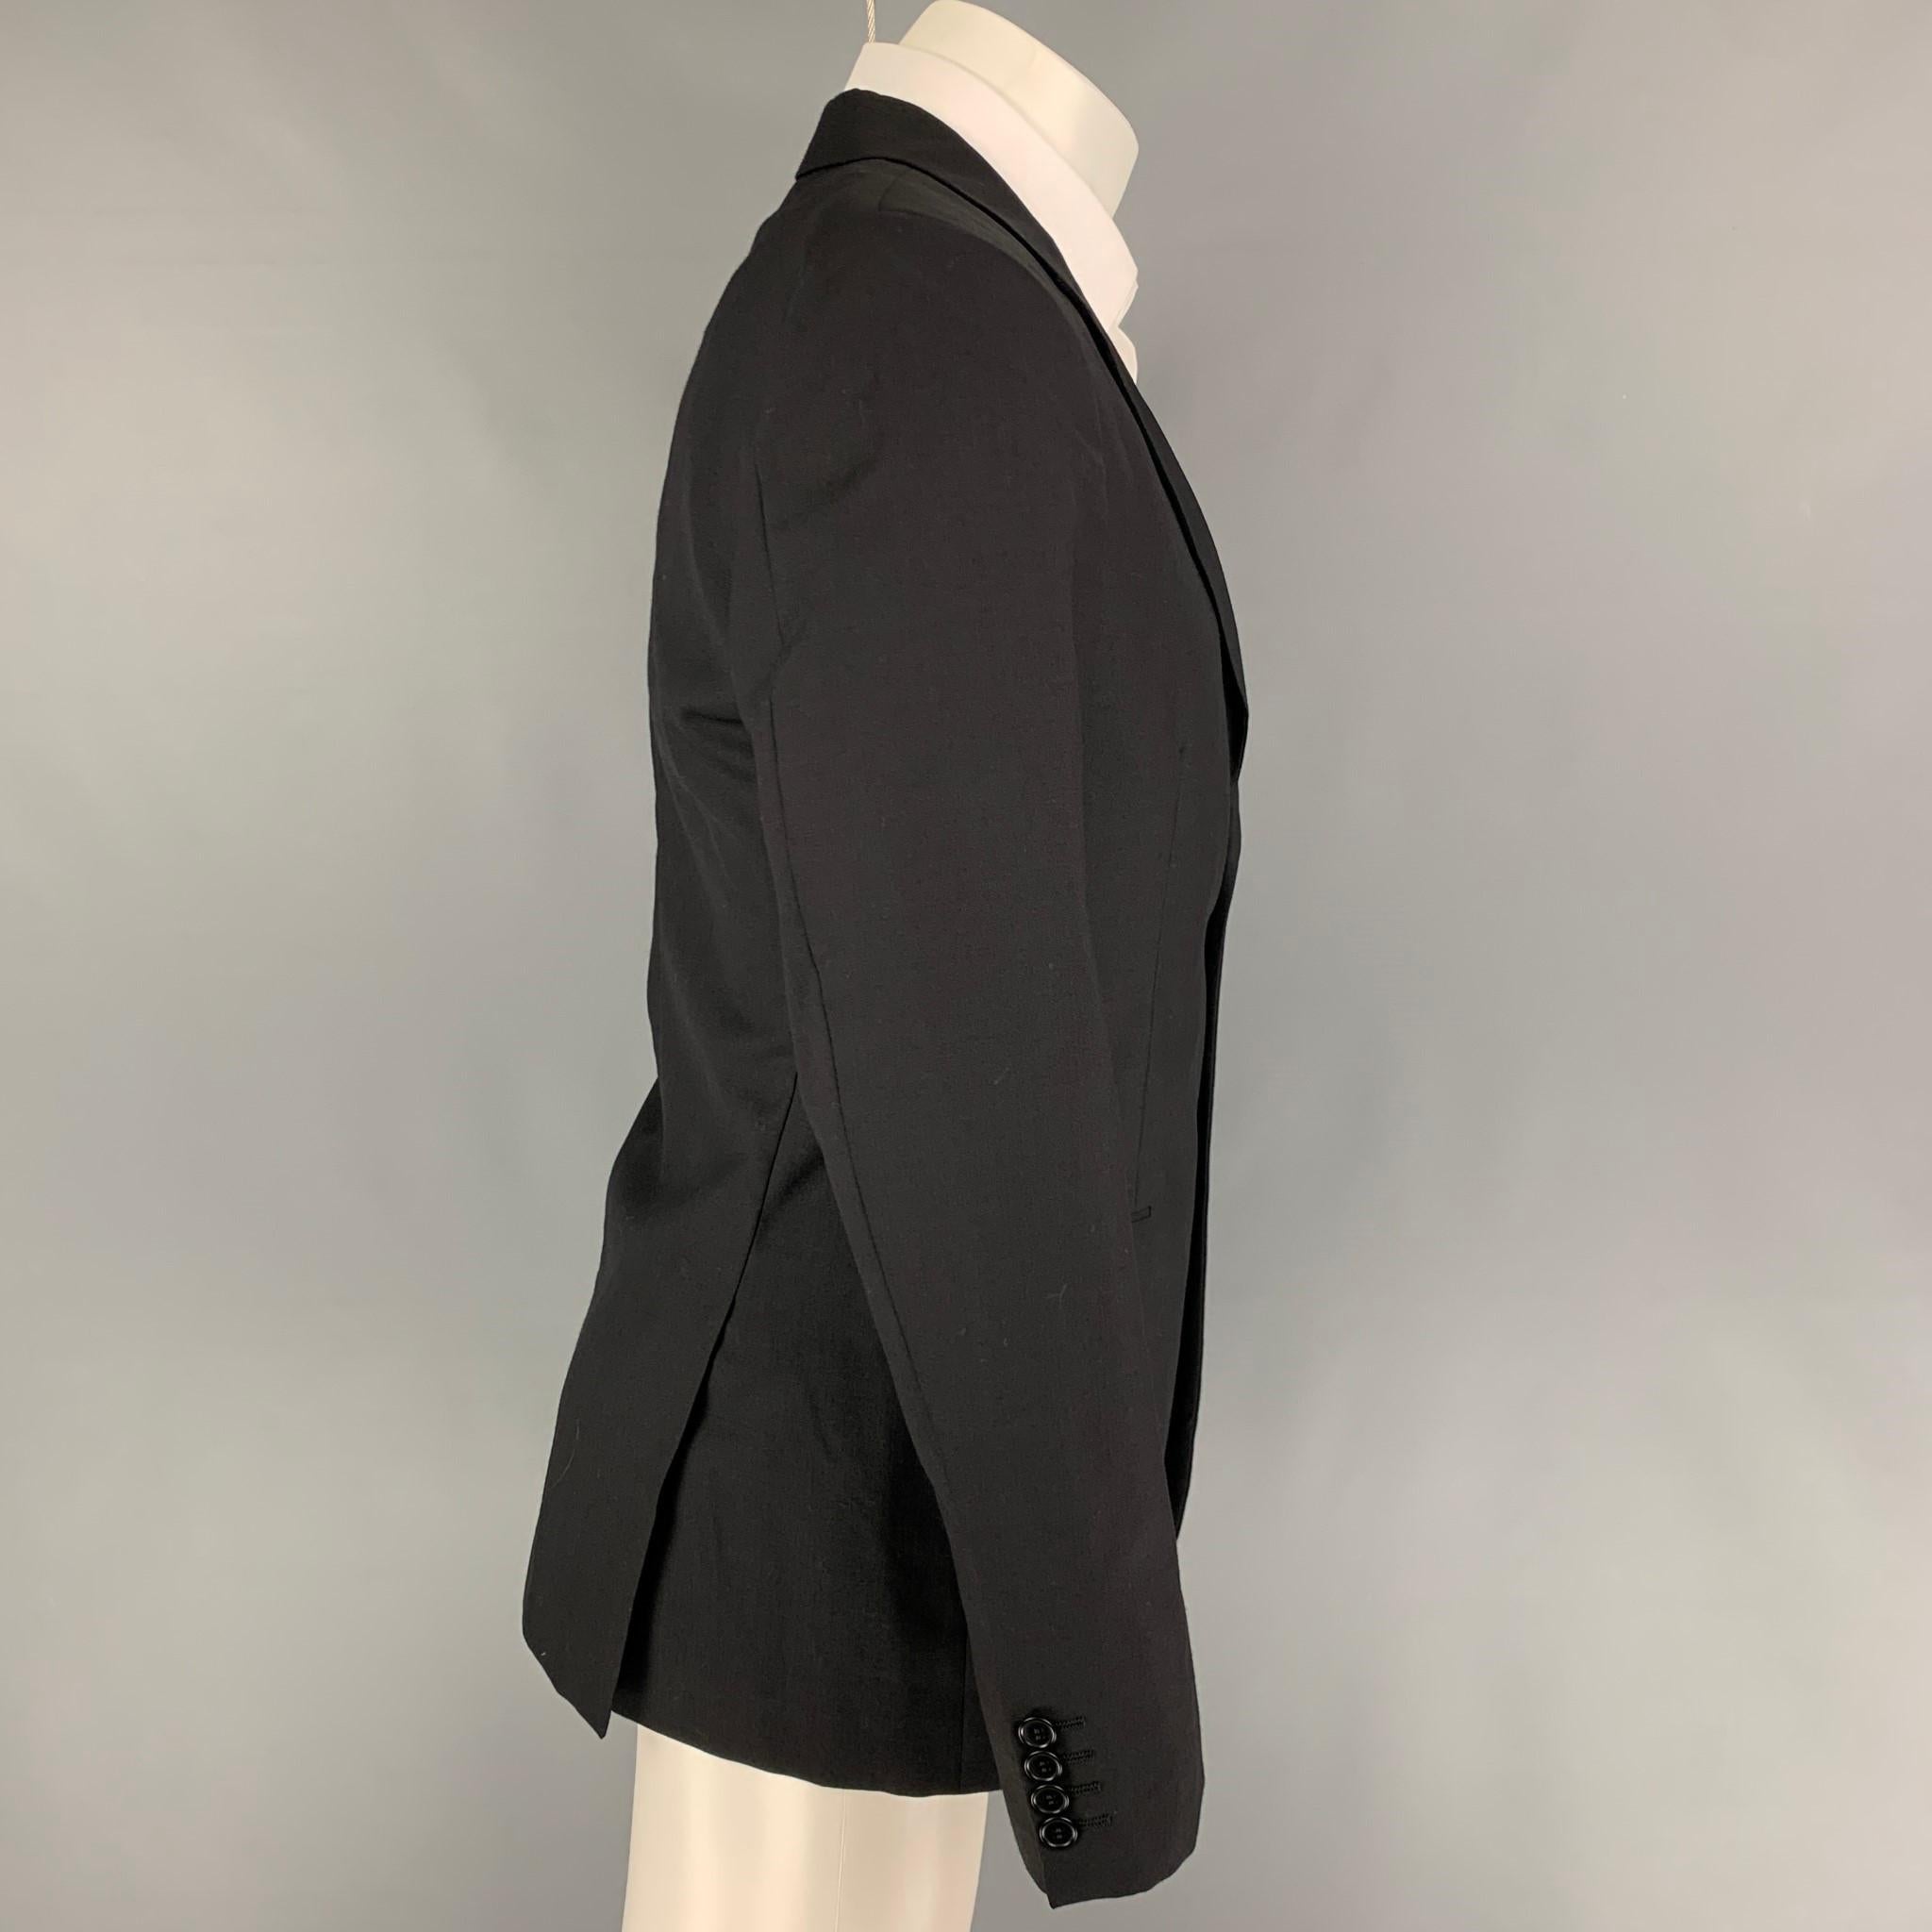 CALVIN KLEIN COLLECTION sport coat comes in a black wool with a full liner featuring a notch lapel, flap pockets, double back vent, and a double button closure. 

Very Good Pre-Owned Condition.
Marked: 48/38

Measurements:

Shoulder: 17.5 in.
Chest: